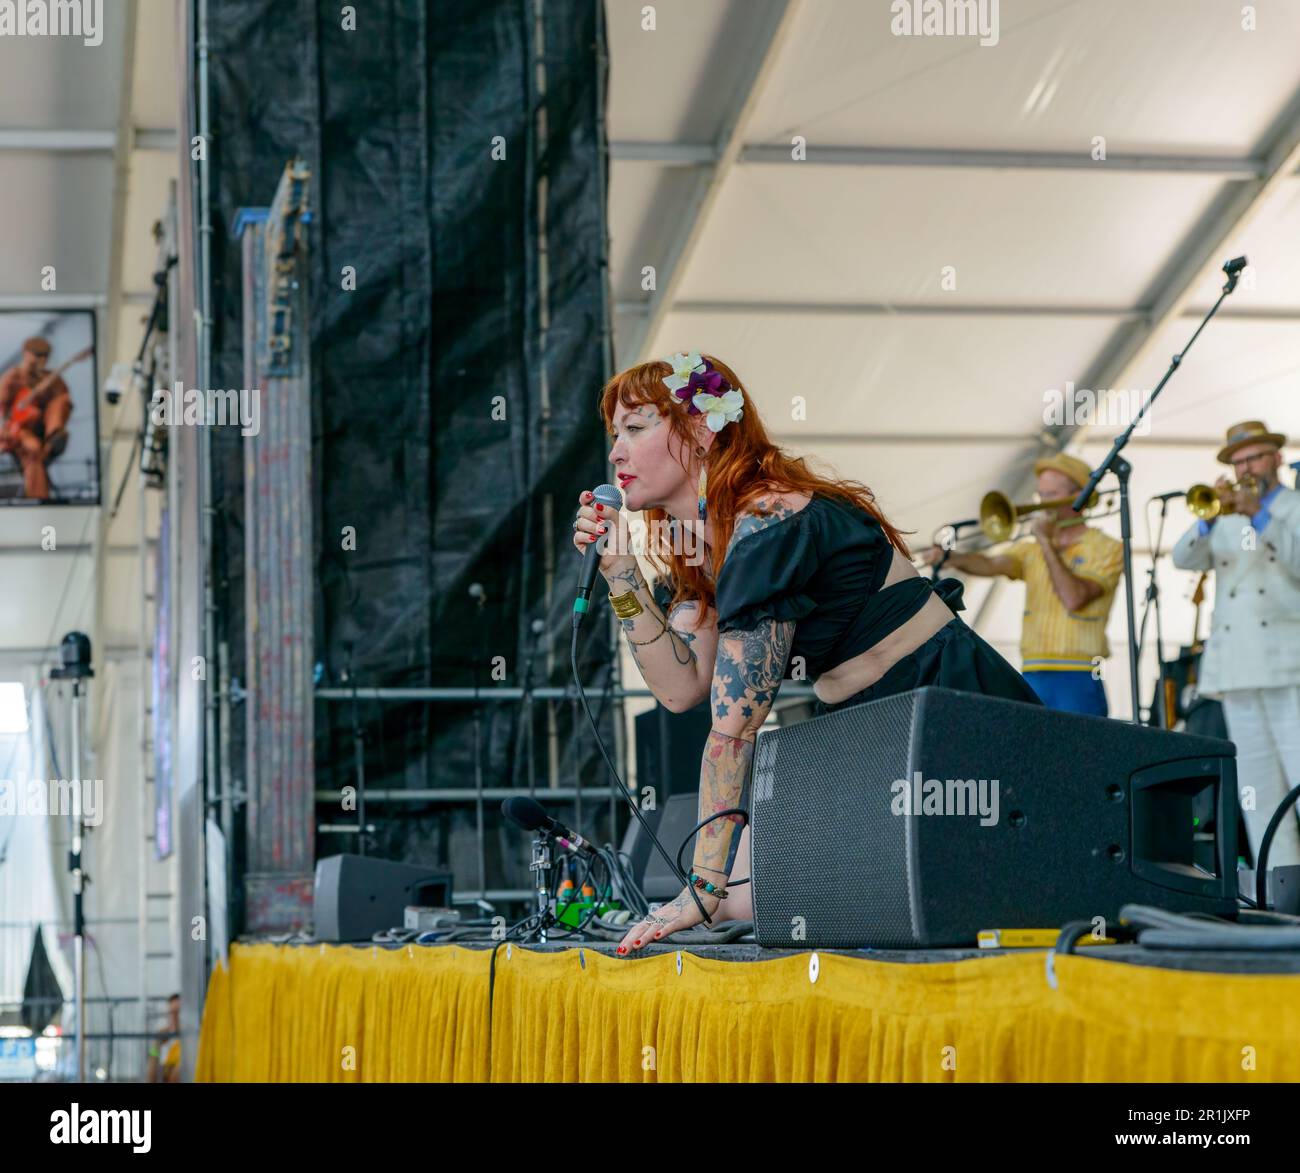 NEW ORLEANS, LA, USA - MAY 4, 2023: Meschiya Lake and the Little Big Horns perform at the Blues Tent at the New Orleans Jazz and Heritage Festival Stock Photo